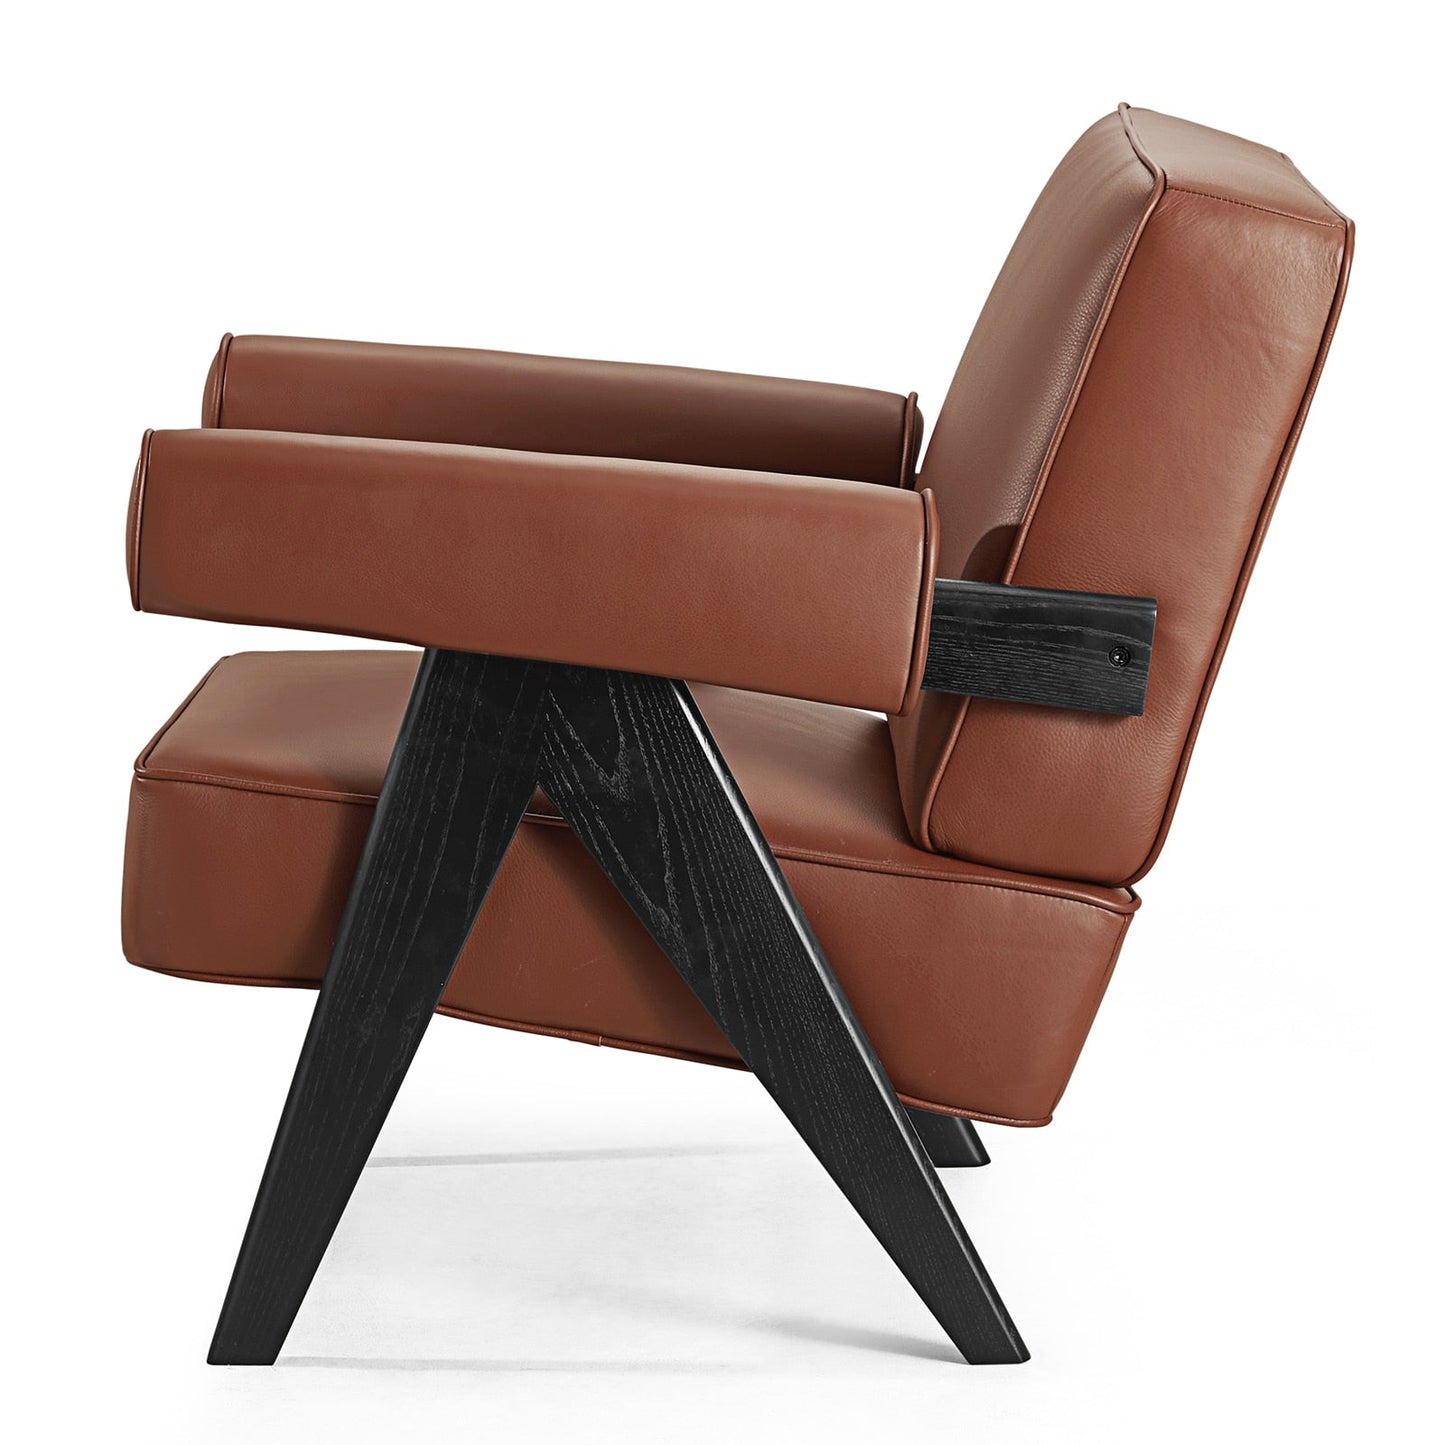 CORX Designs - Chandigarh Armchair by Pierre Jeanneret with Genuine Italian Leather - Review